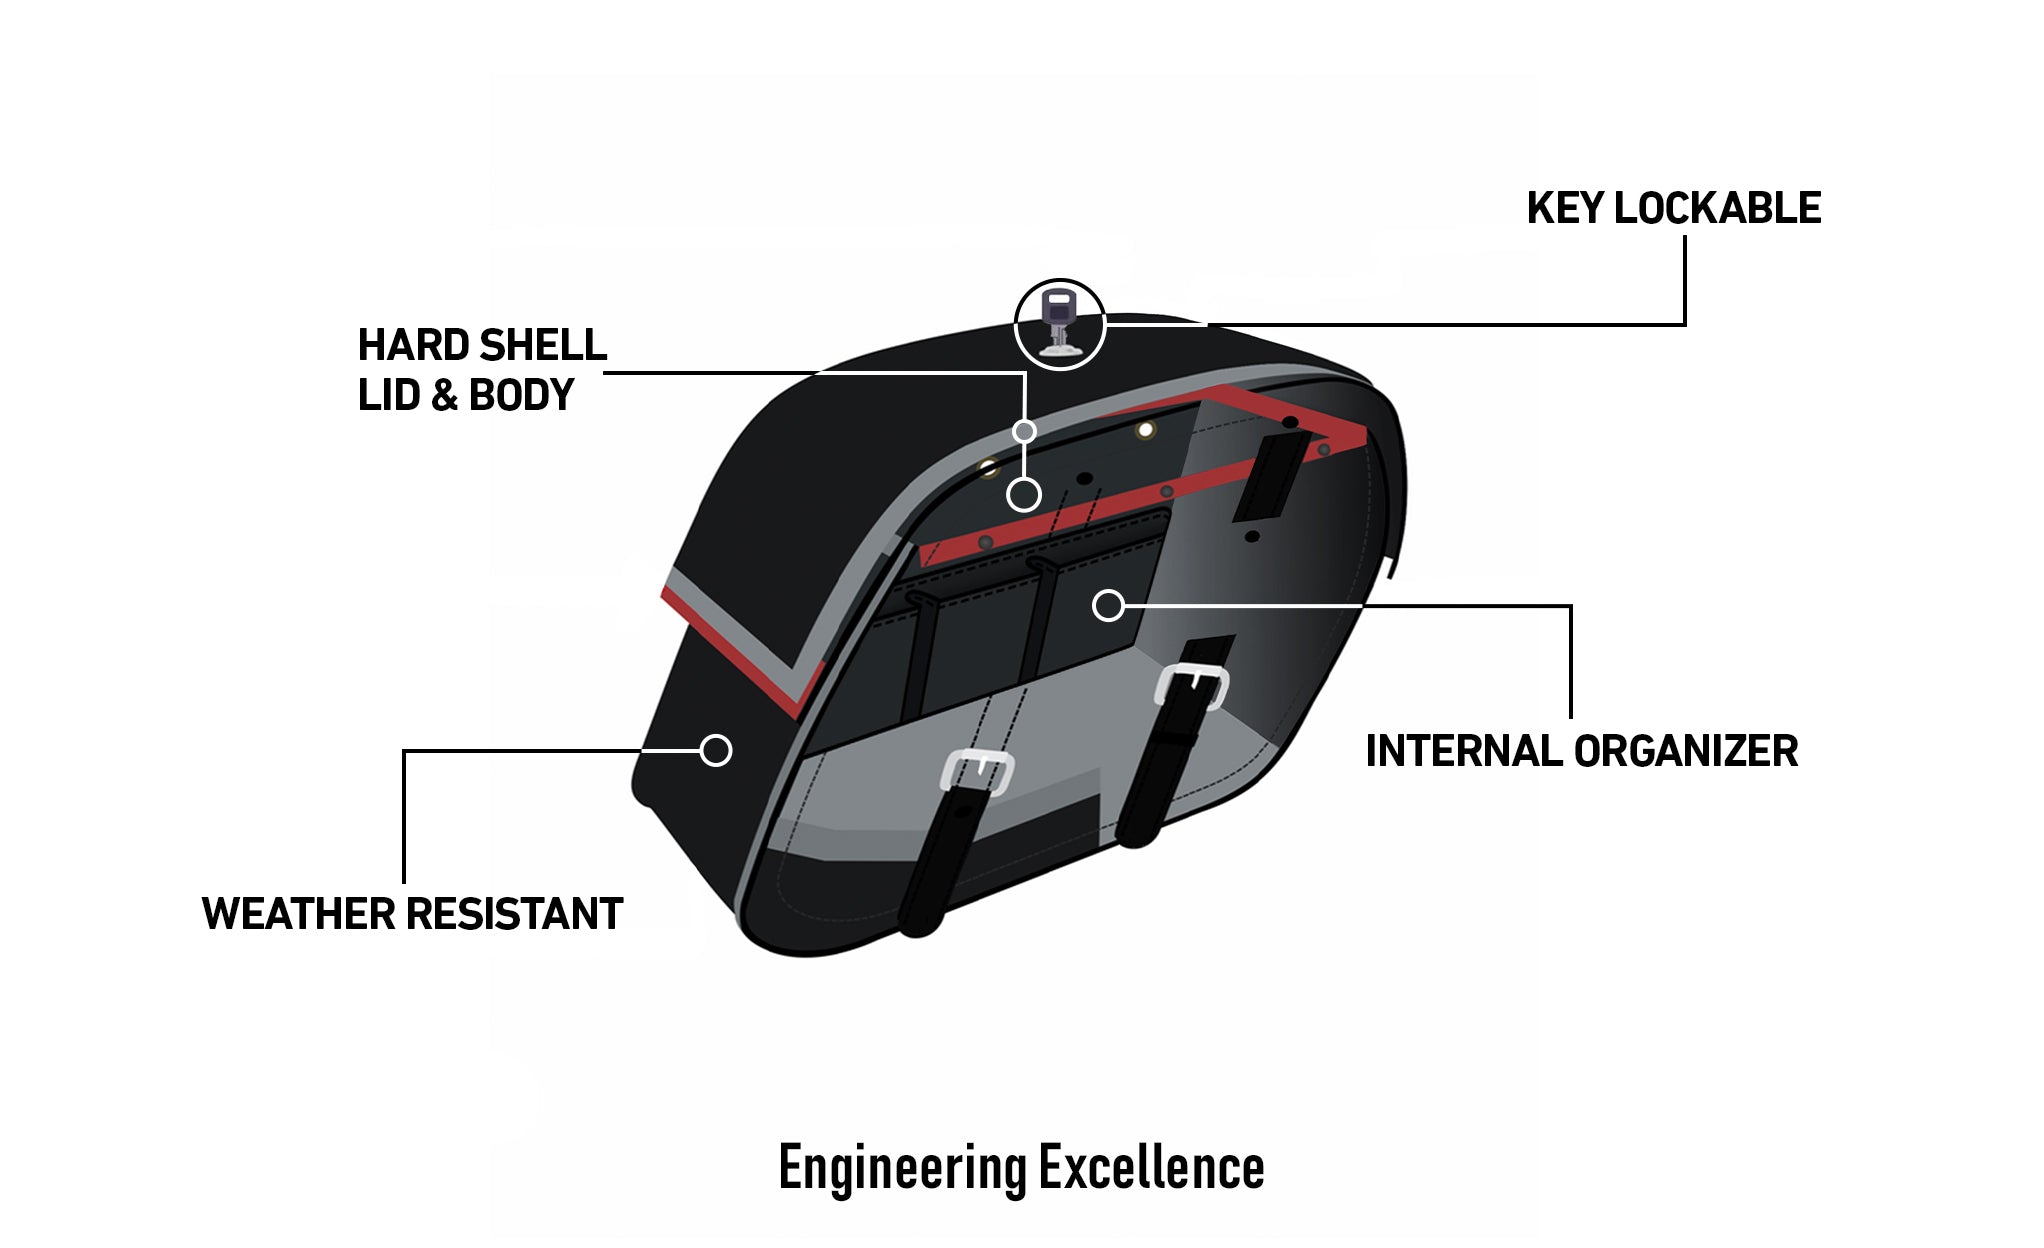 Viking Raven Large Motorcycle Leather Saddlebags For Harley Softail Standard Fxst I Engineering Excellence with Bag on Bike @expand